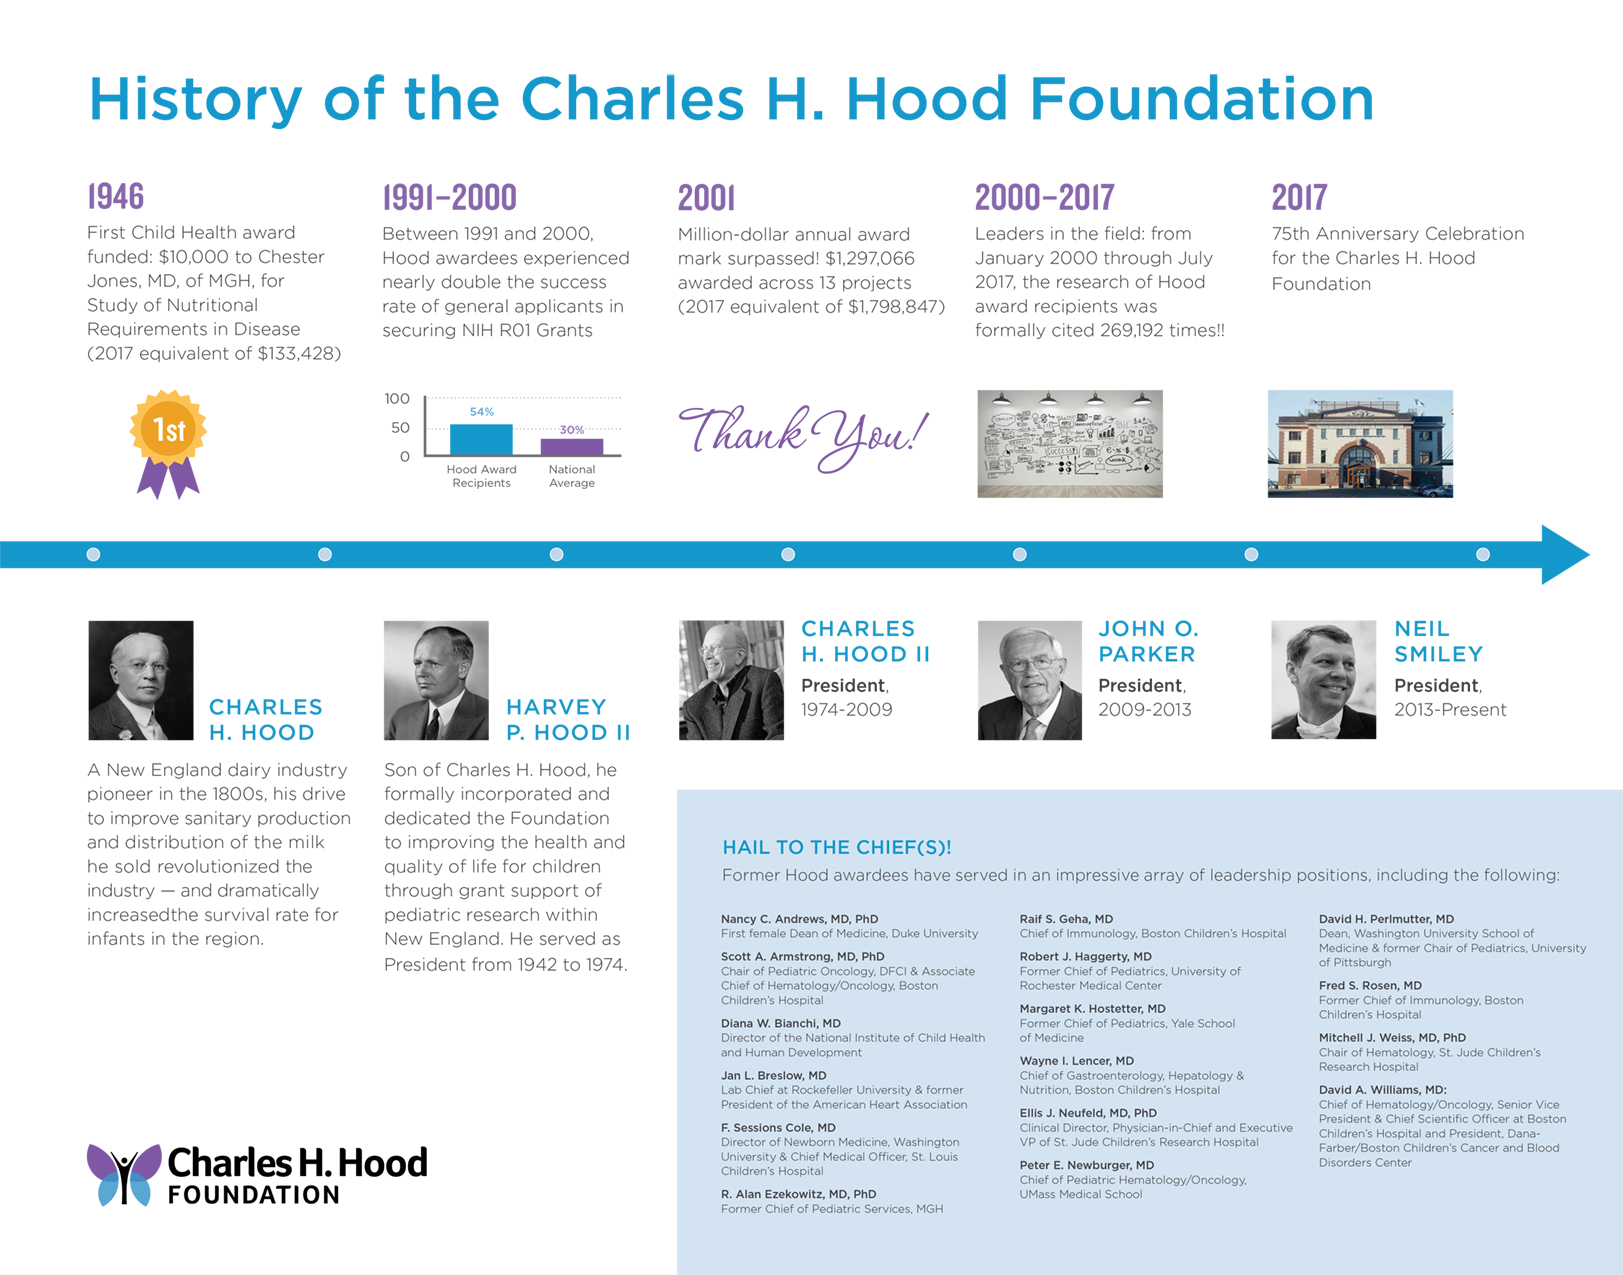 Timeline History of Charles H Hood Foundation, 1946 to 2017